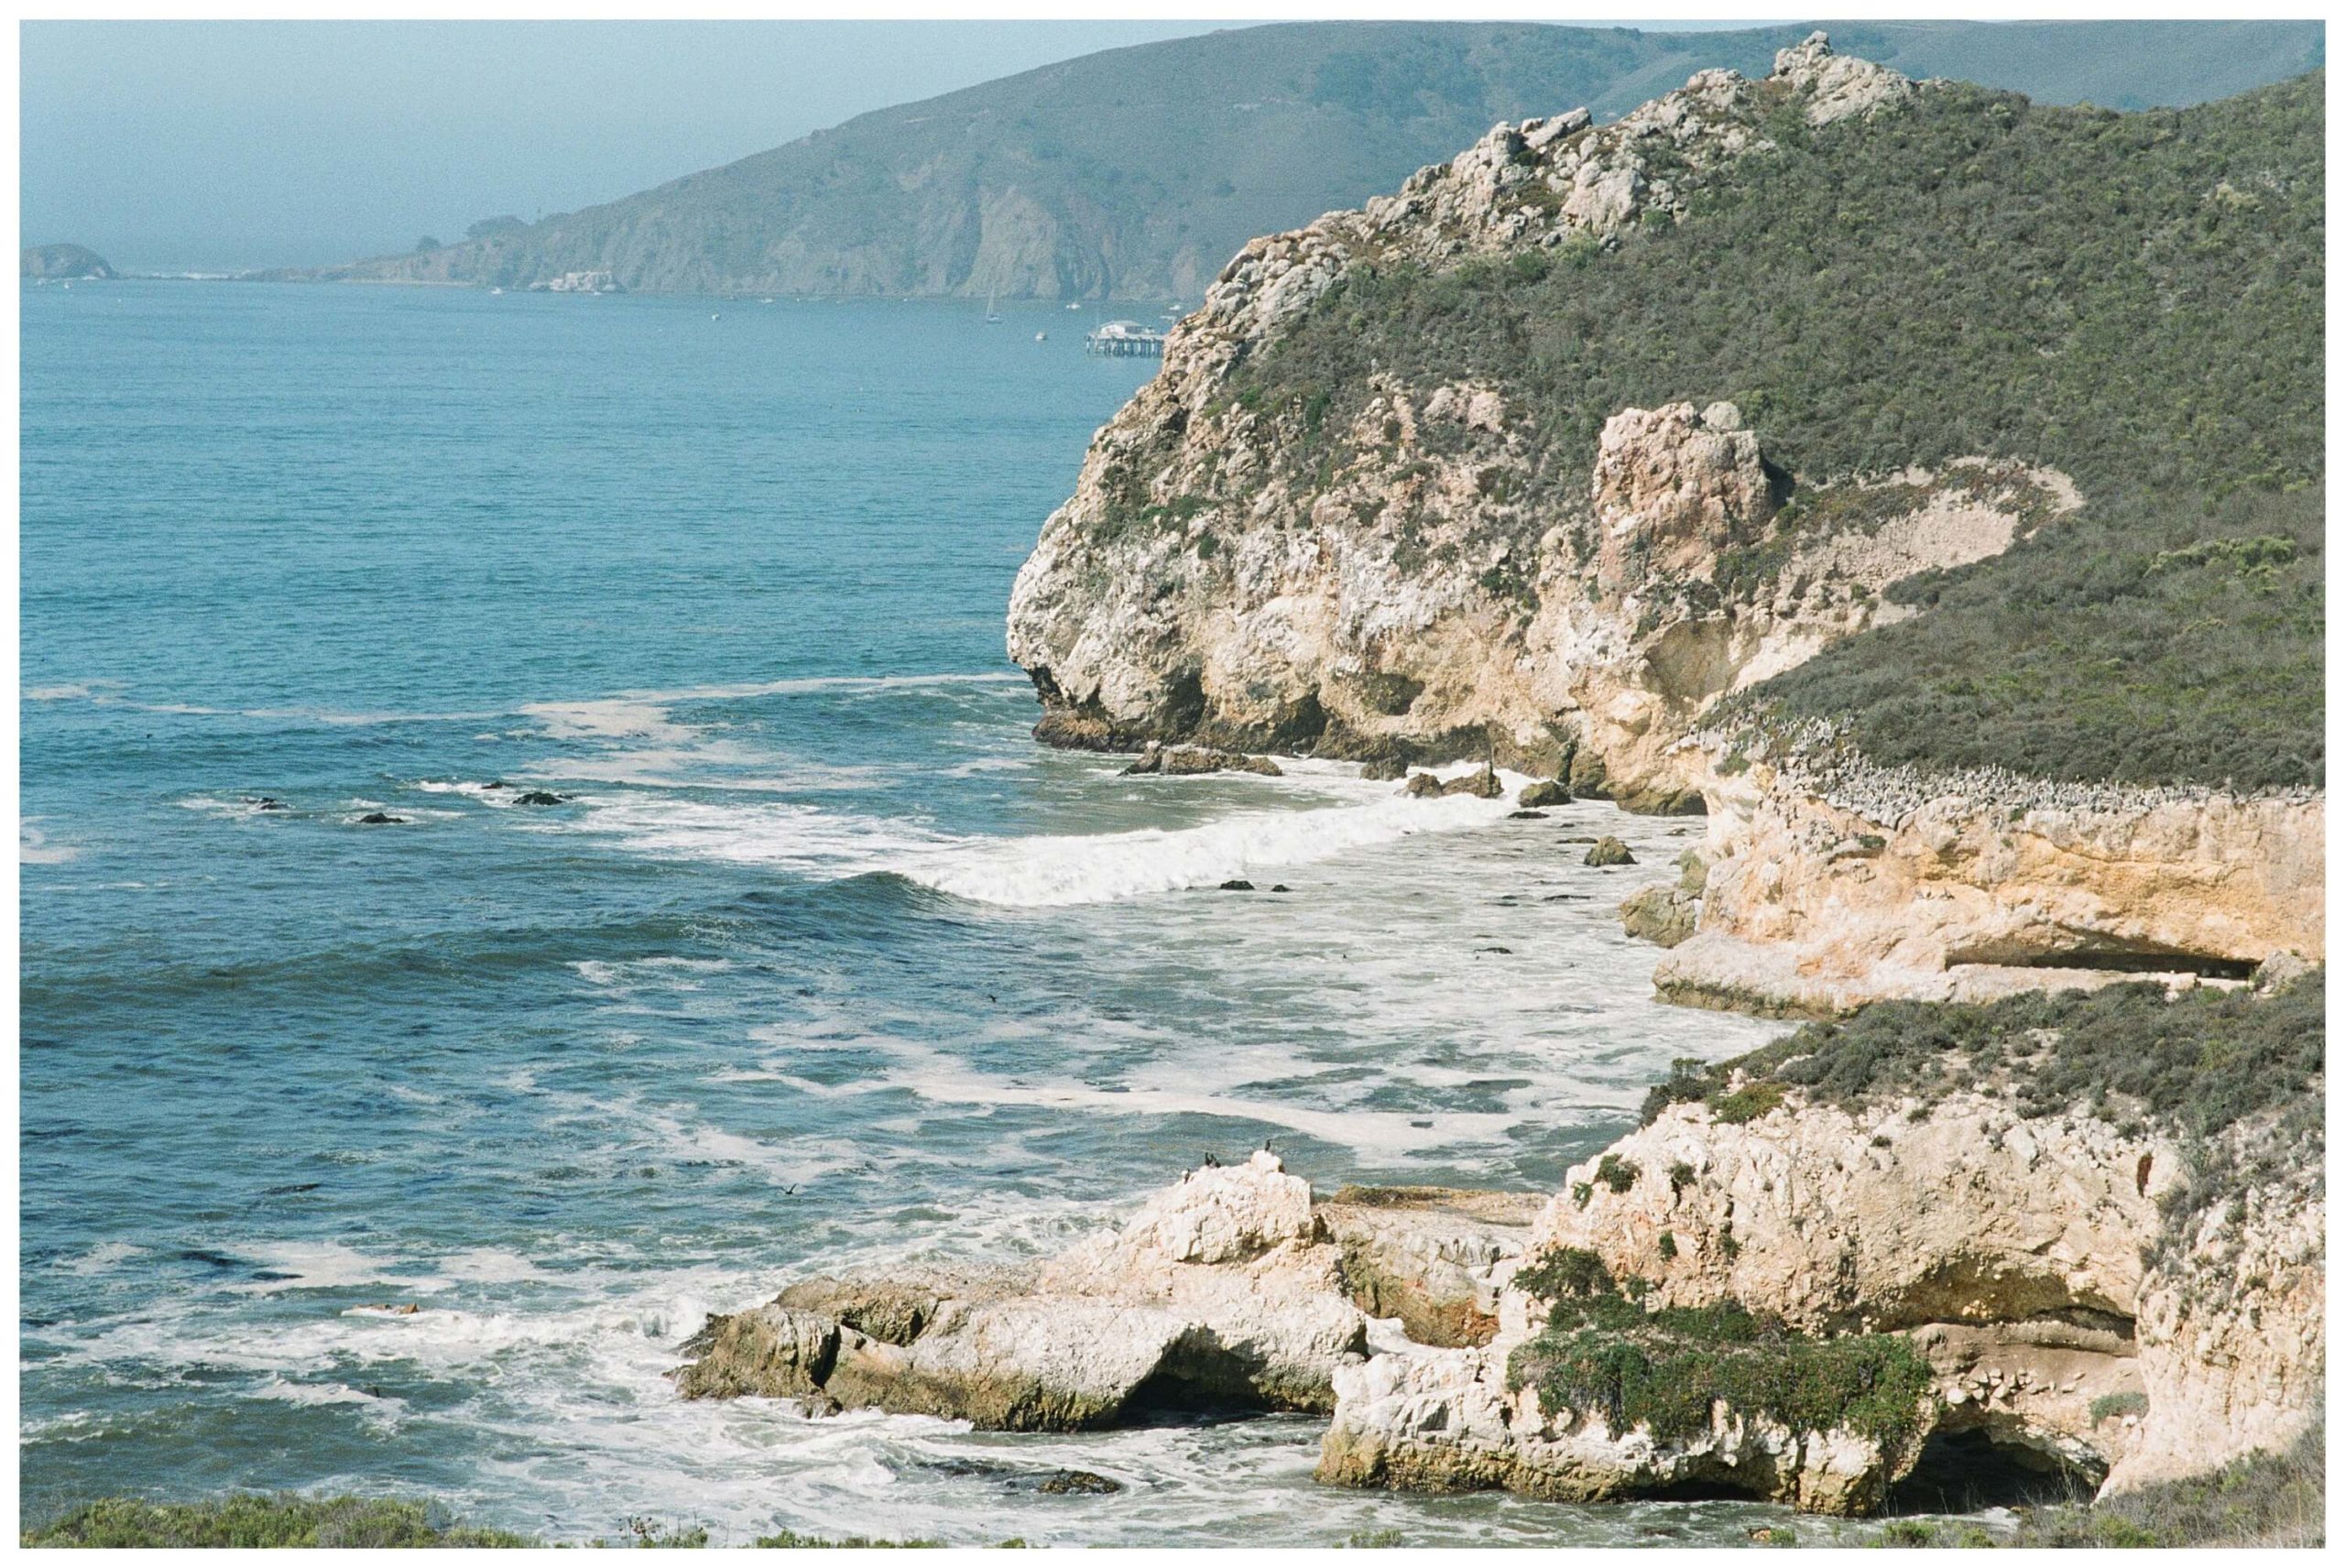 Things to do in San Luis Obispo. Sapphire-blue ocean waves crash on the rocks at Pirate's Cove in San Luis Obispo.